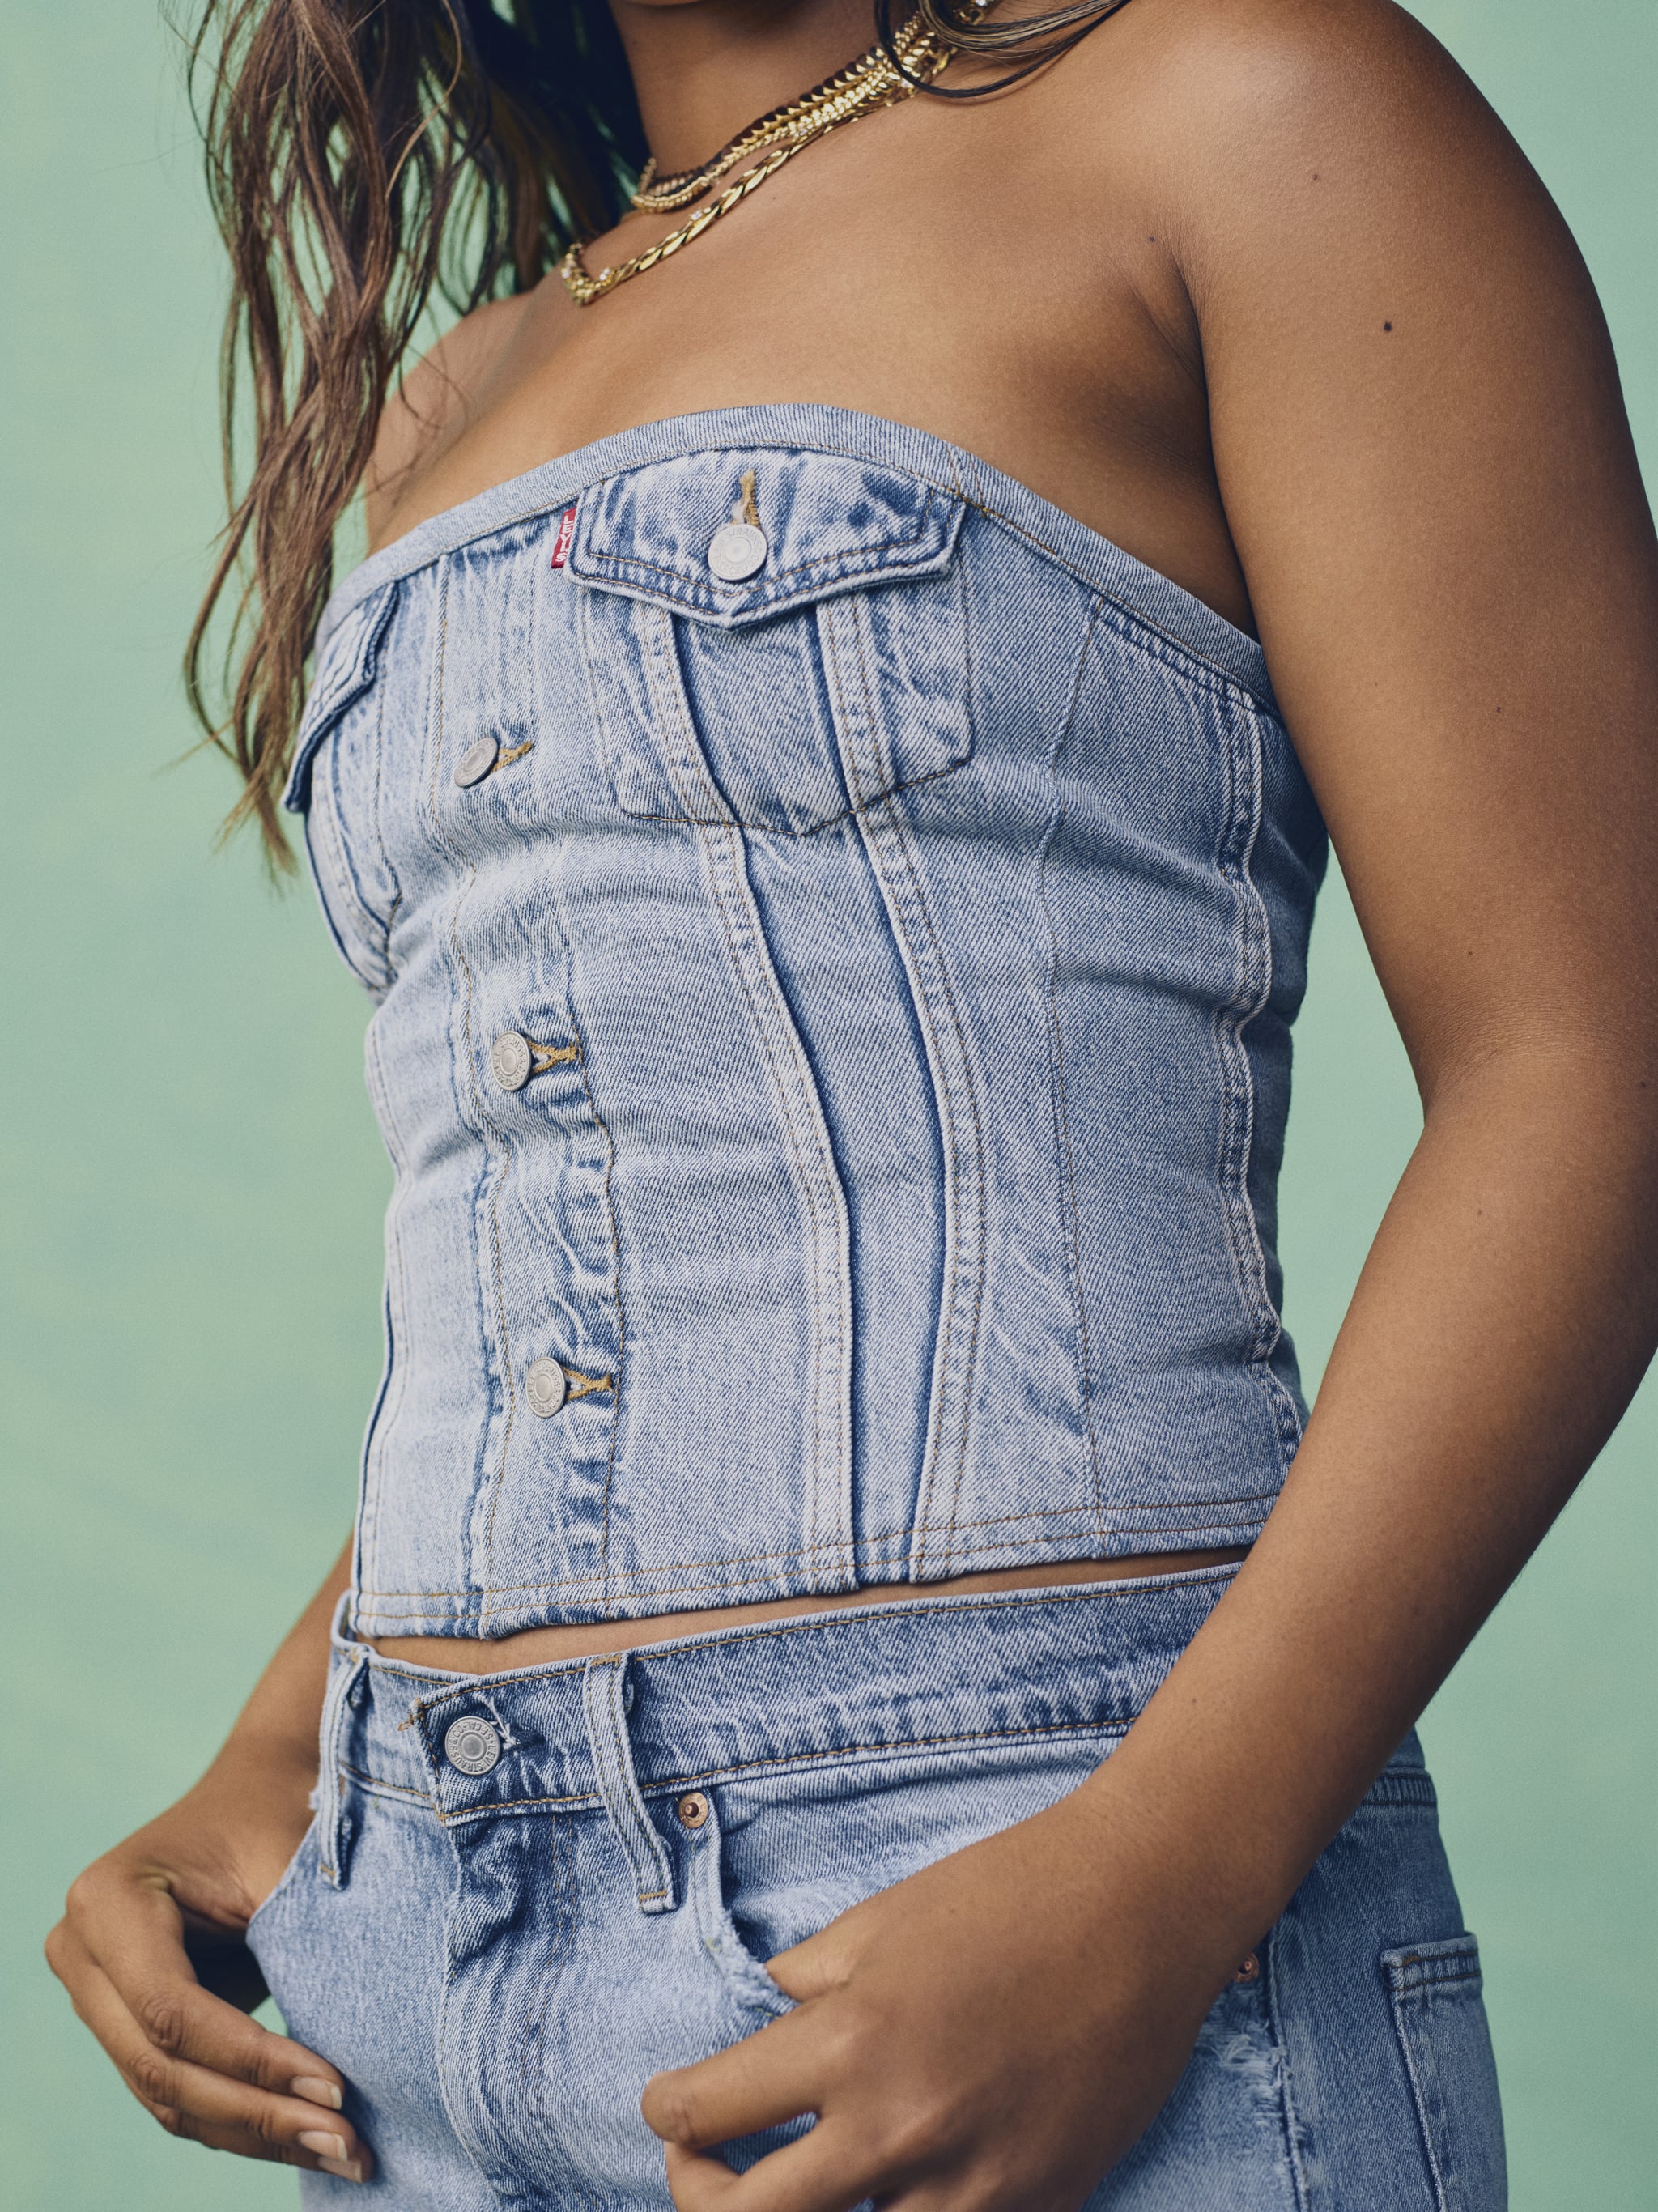 Naomi Osaka x Levi's Trucker Jacket Bustier, Naomi Osaka Dreamed Up a  Sustainable Levi's Collection That's So Perfectly Her